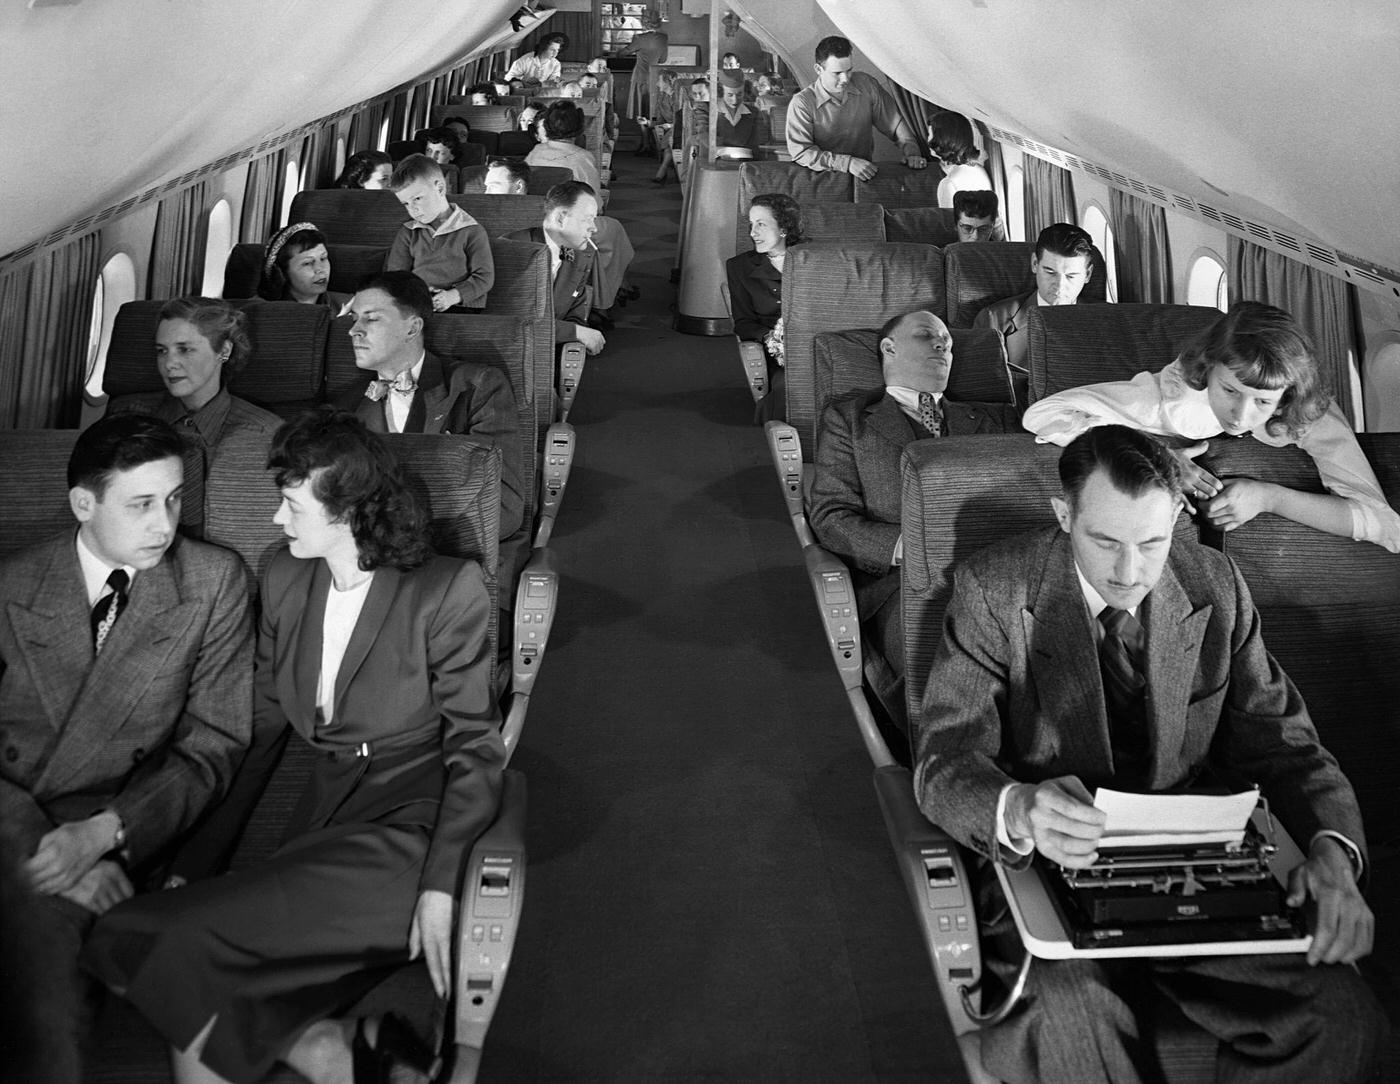 Passengers are seen in the cabin of a Boeing 377 Stratocruiser.